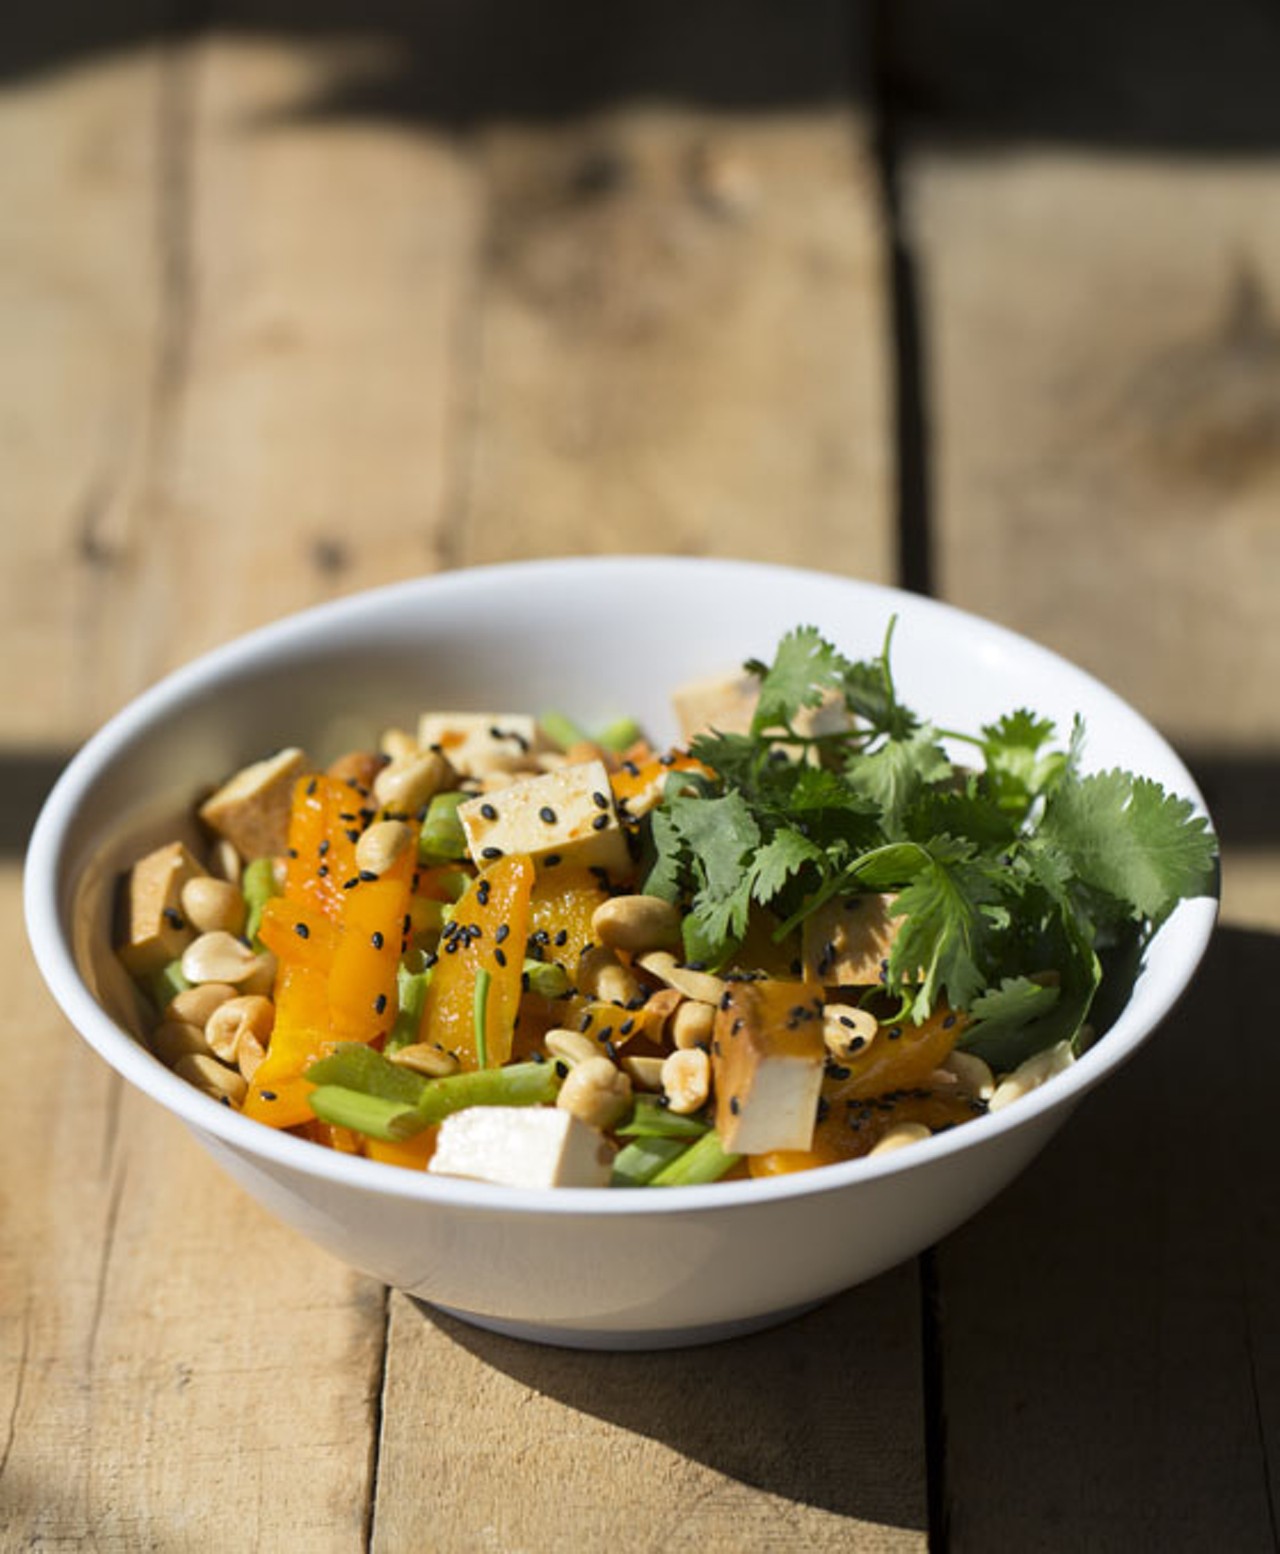 The "Buddha Bowl" is brimming with udon noodles, organic marinated tofu, stir-fried vegetables, green onion, cilantro, crushed peanuts, black sesame seeds and homemade peanut sauce.